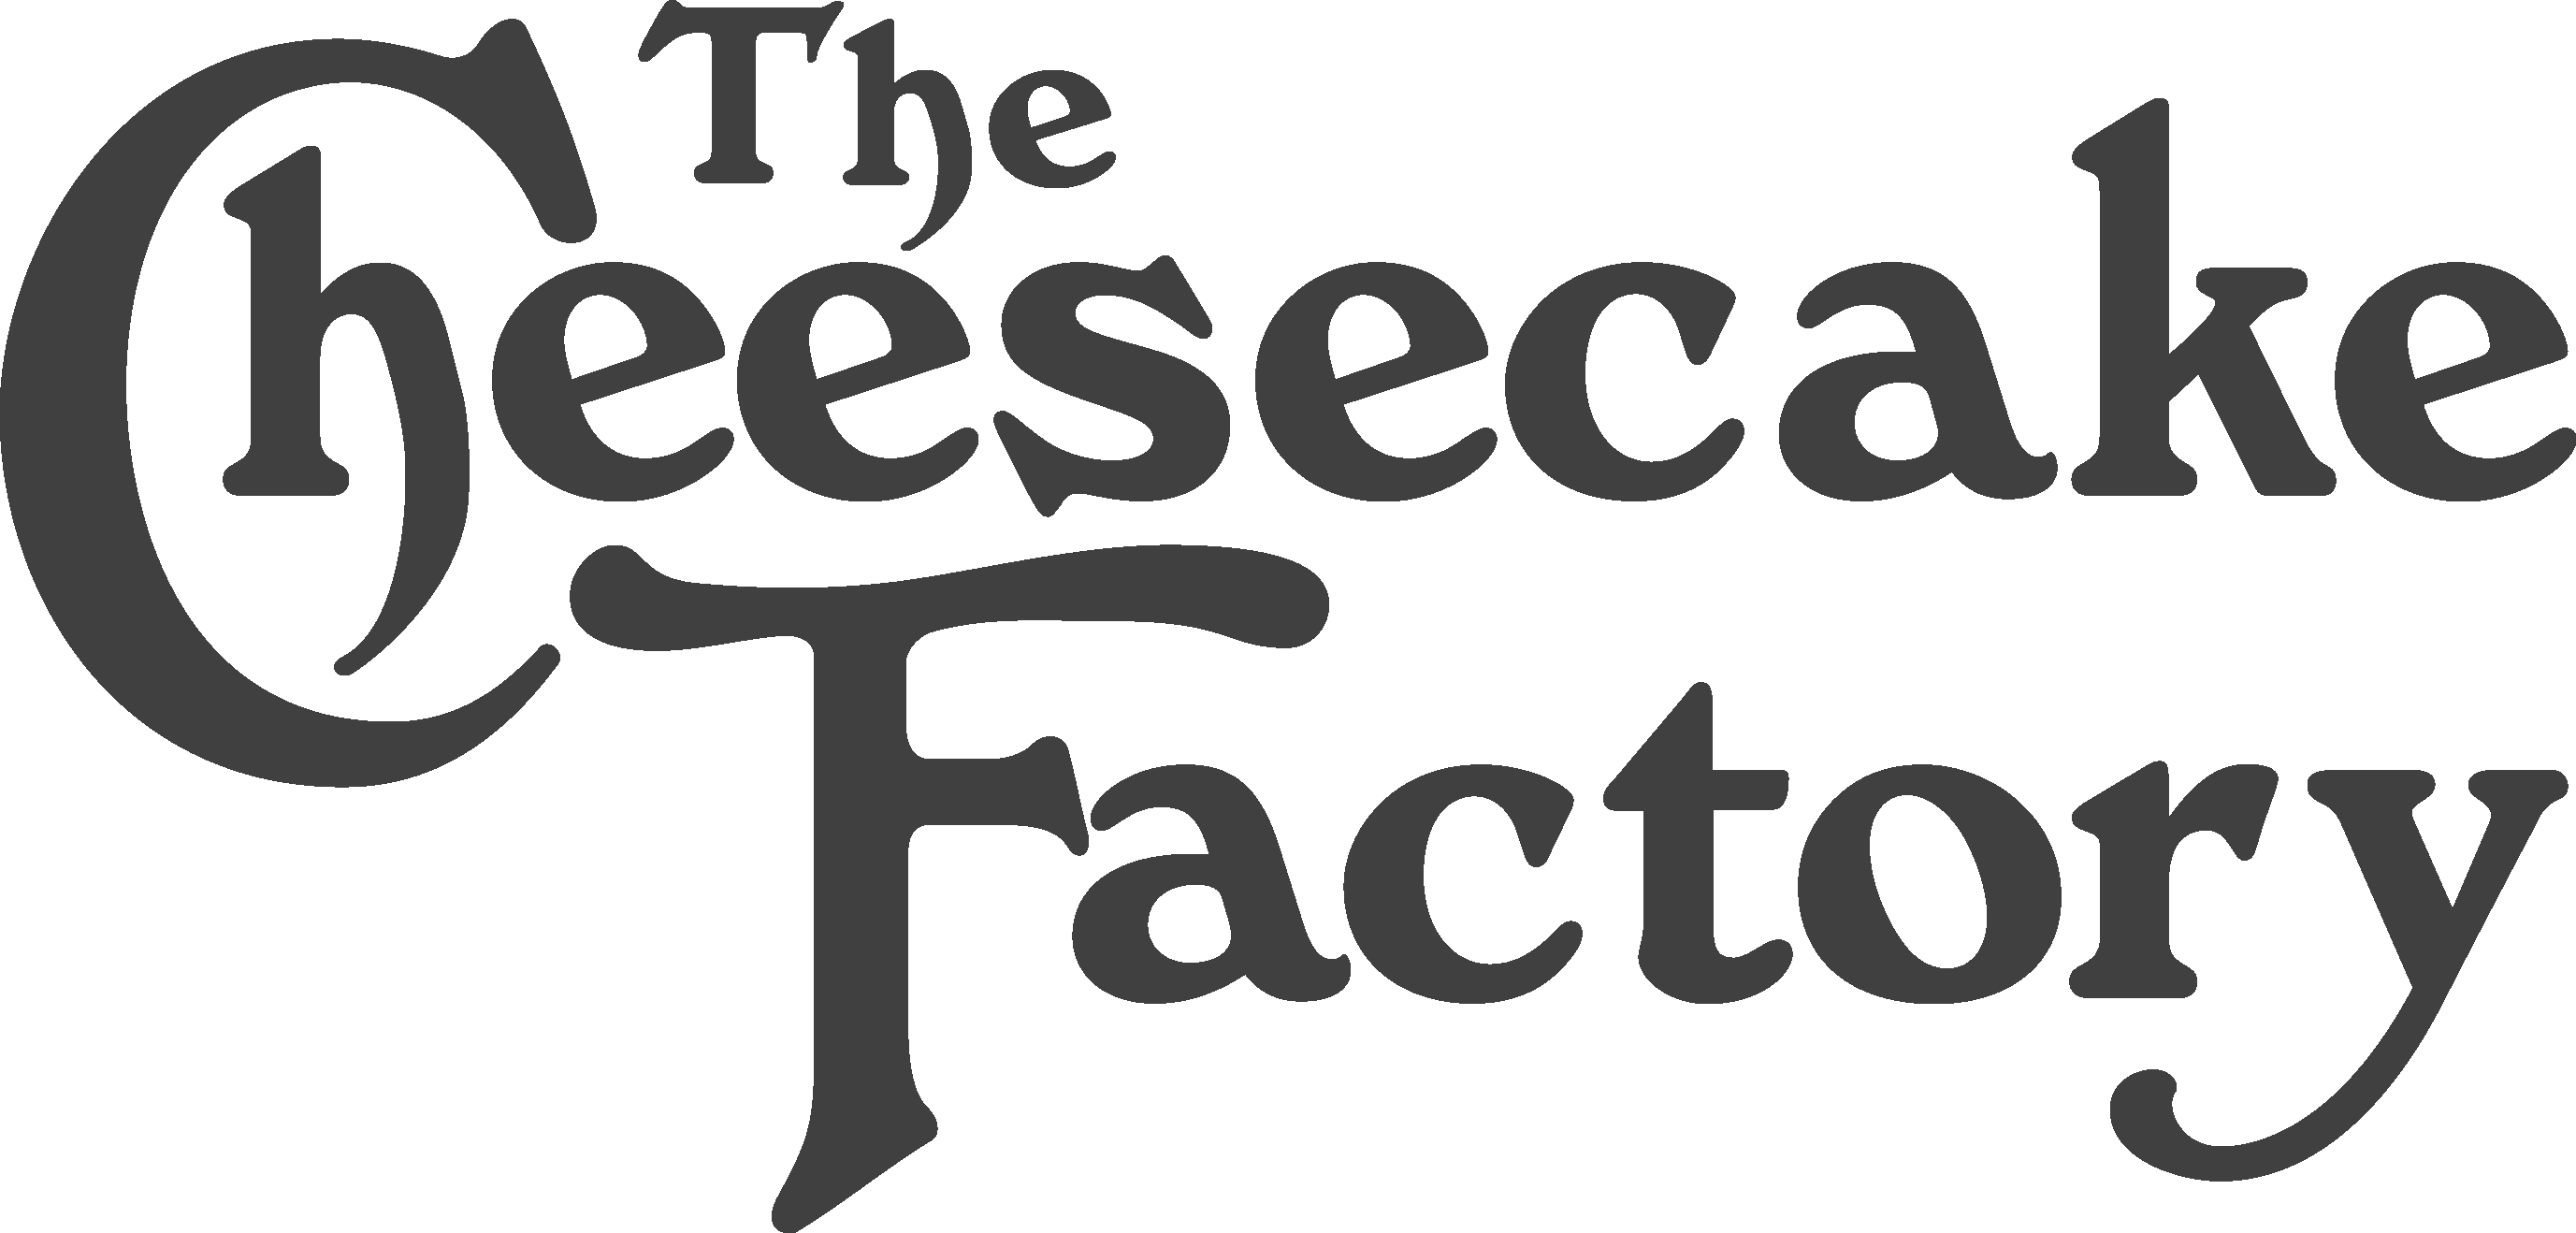 Cheesecake Factory Logo - The Cheesecake Factory Logo Downloads Graphic Design Materials